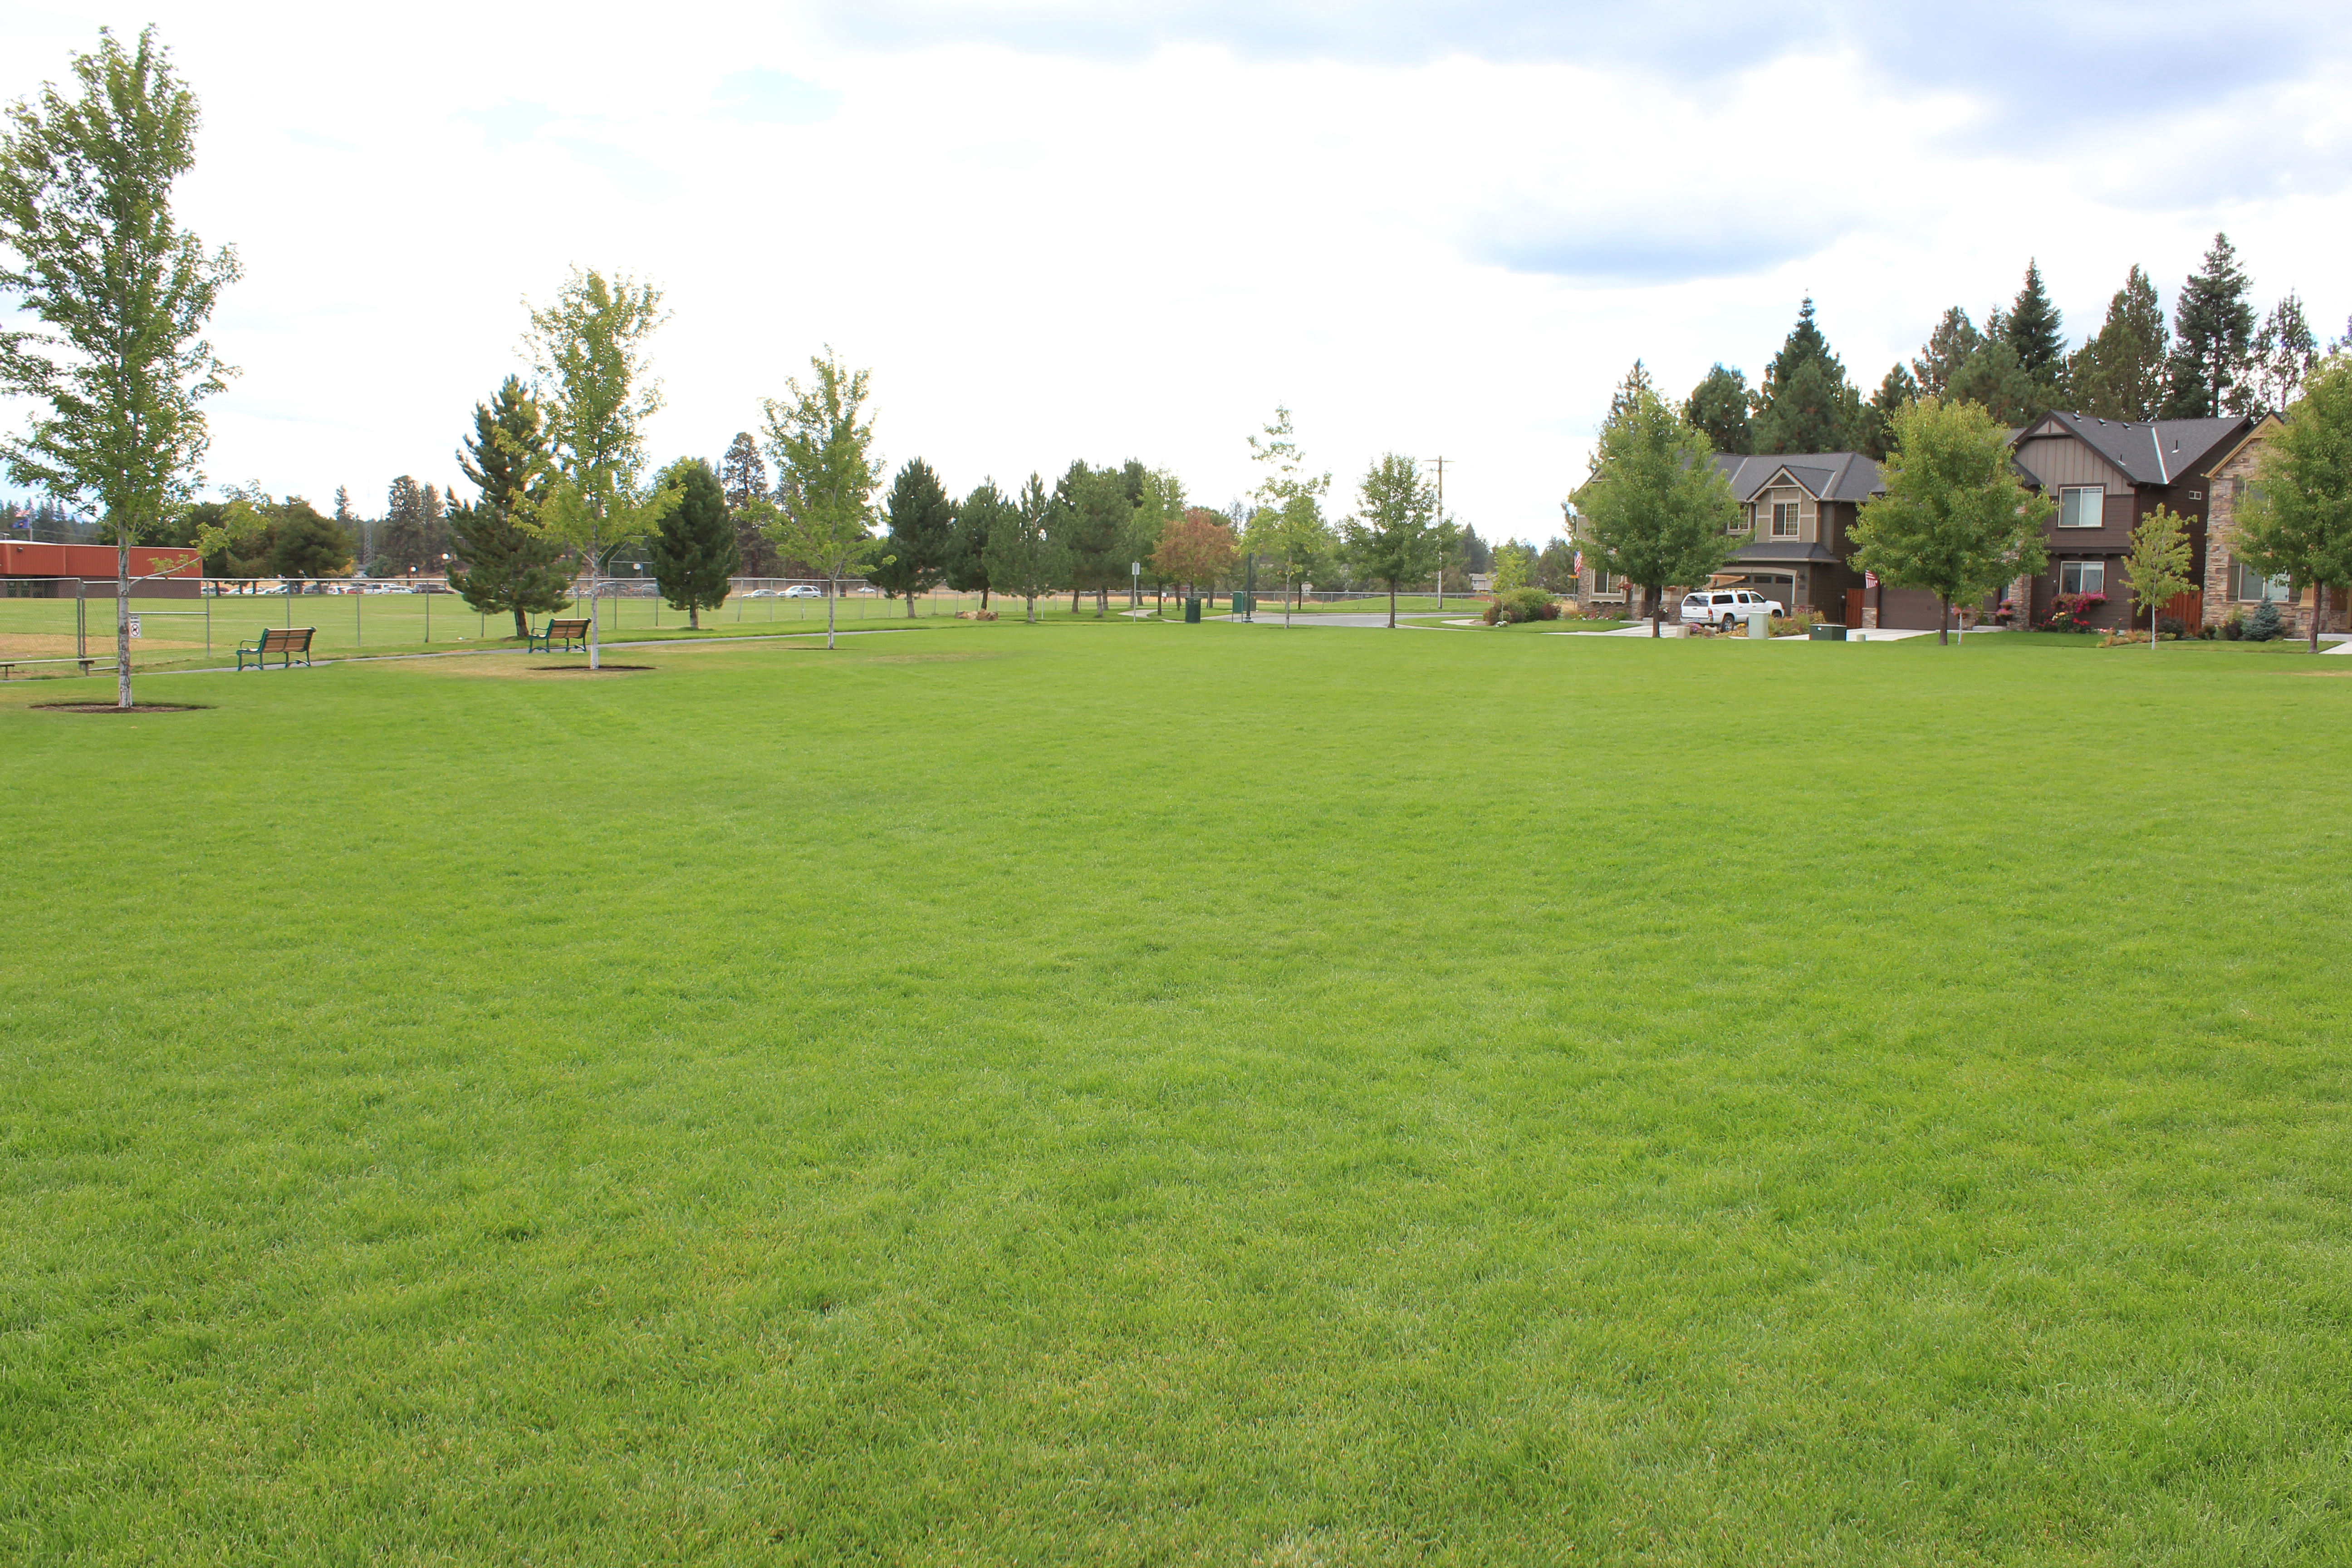 The open lawn at Sun Meadow Park